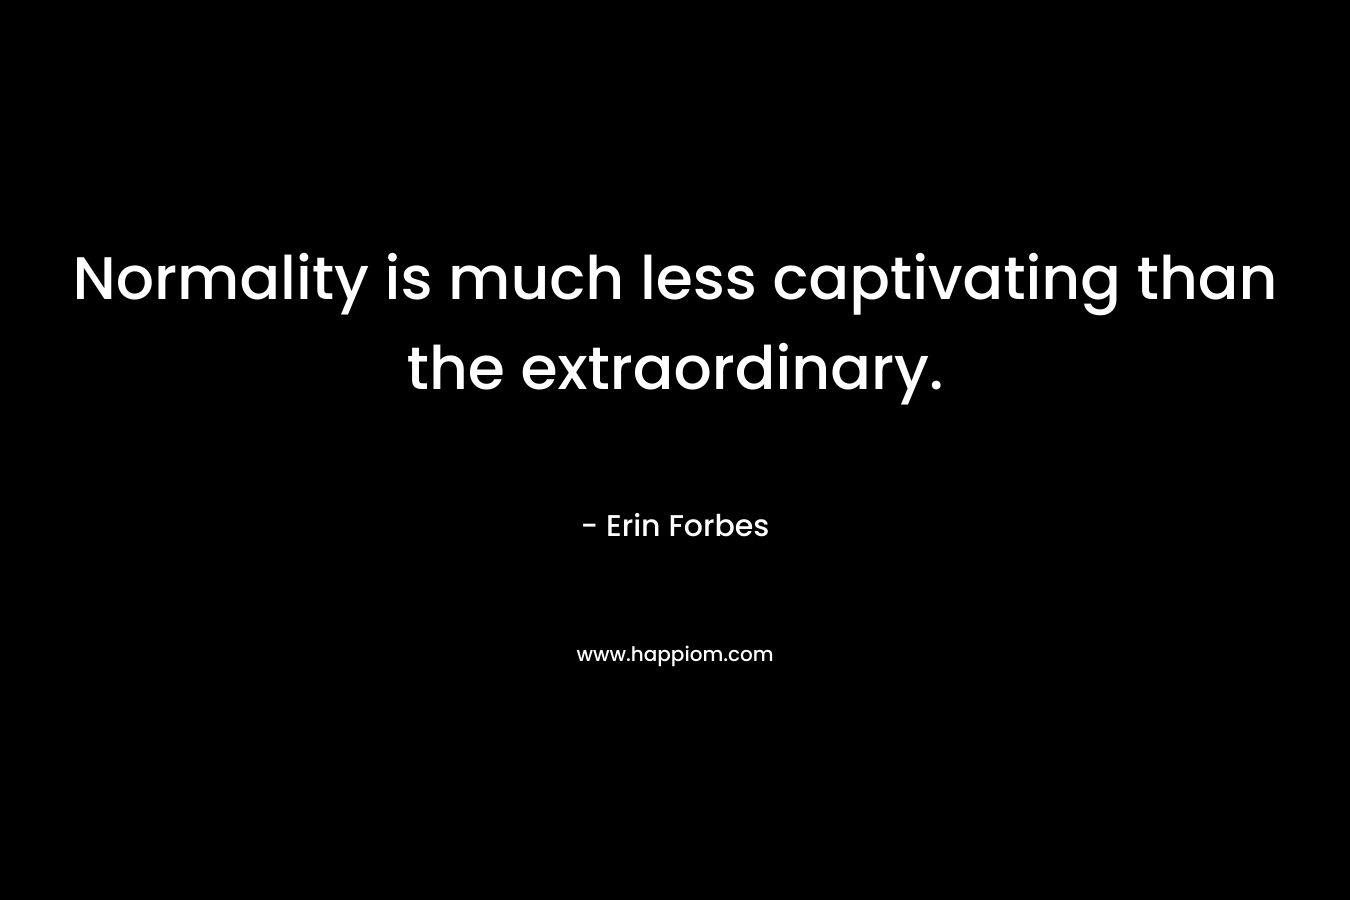 Normality is much less captivating than the extraordinary. – Erin Forbes